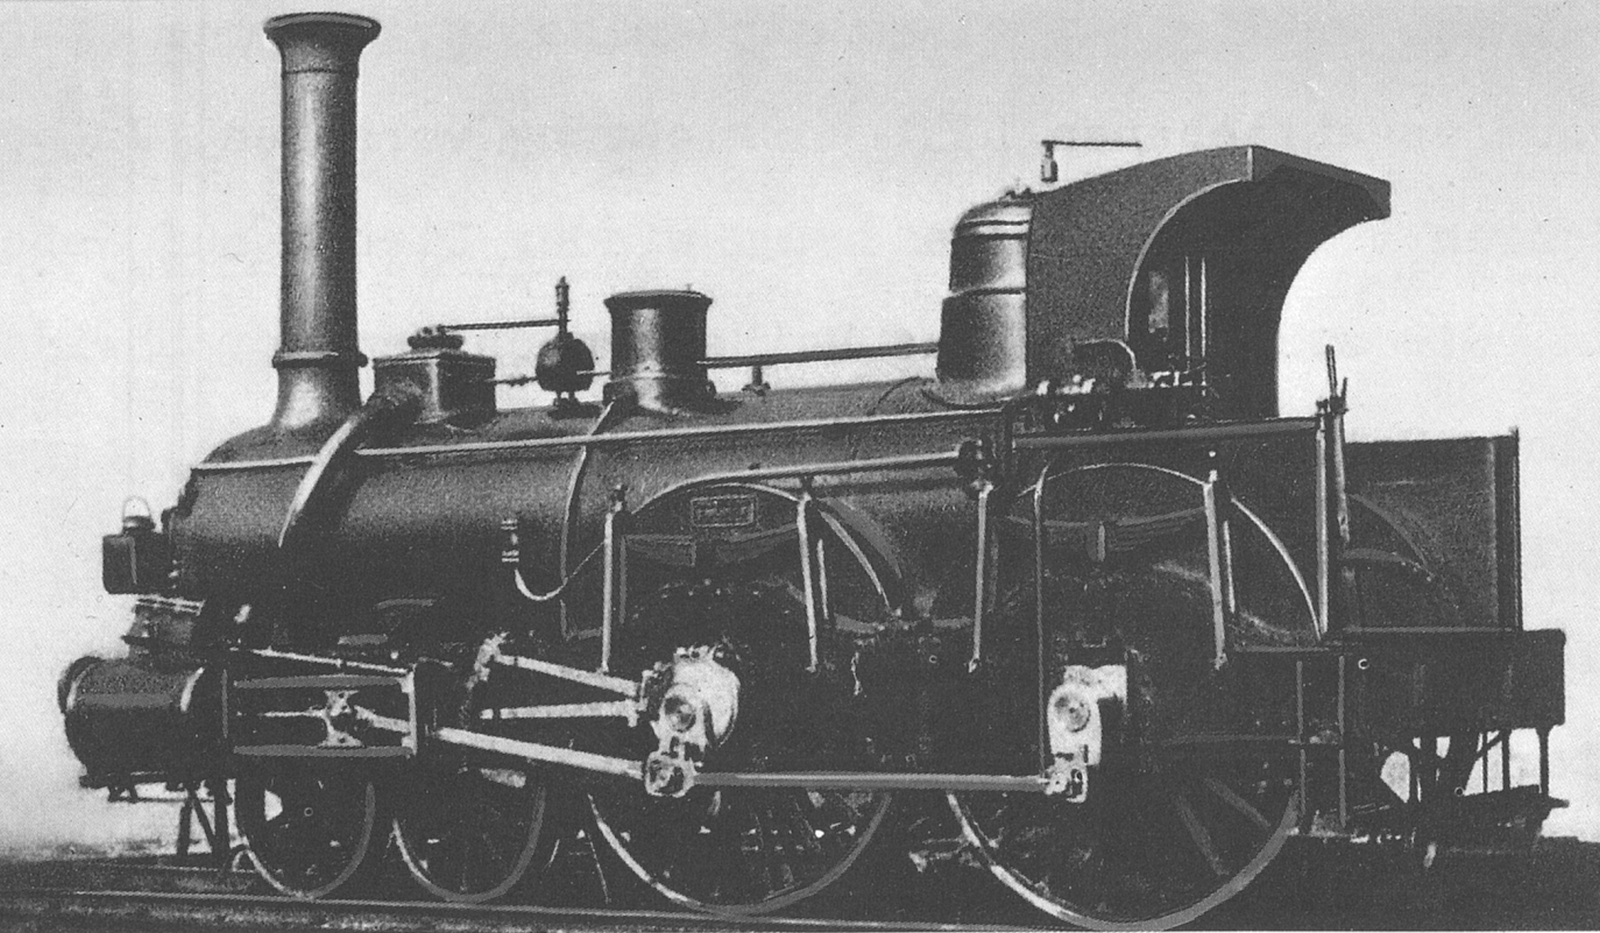 No. 127 with a small steam dome on a works photo of MBG Karlsruhe